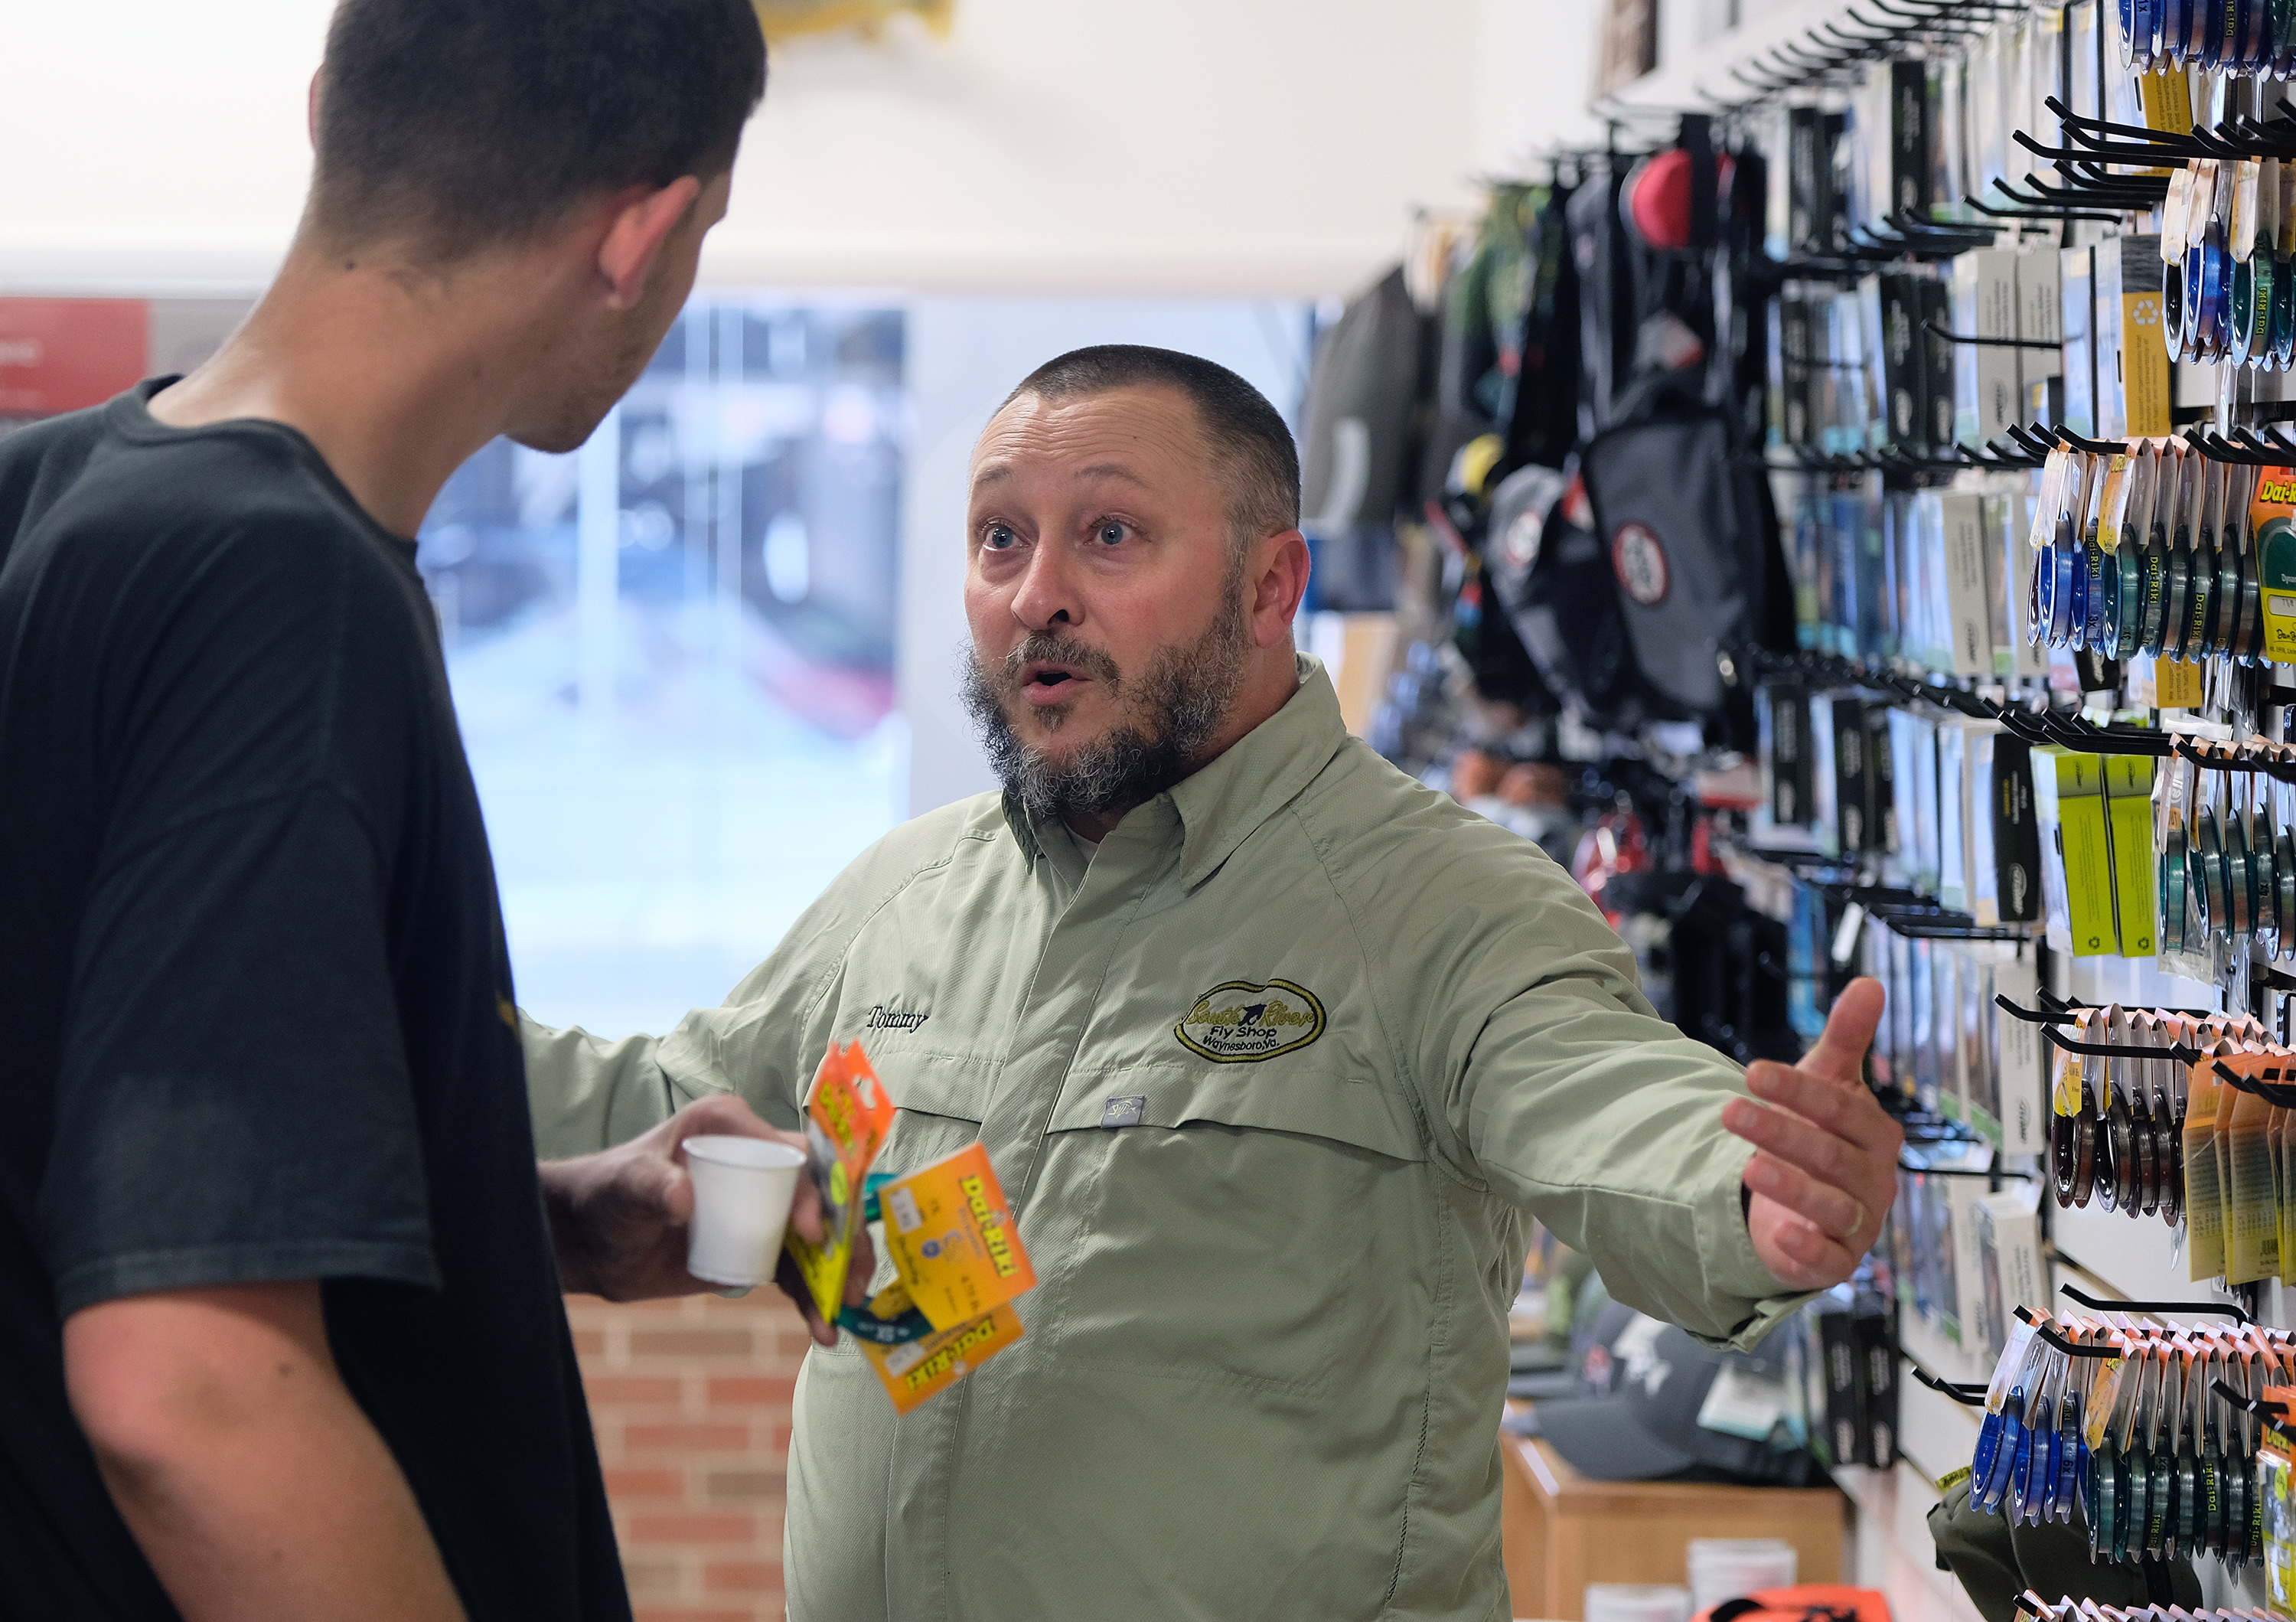 Tommy Lawhorne, right, talks with customer Chase Halterman of Goshen, Va. at the South River Fly shop in Waynesboro, Va., Thursday, Oct. 13, 2016. (Photo by Norm Shafer).